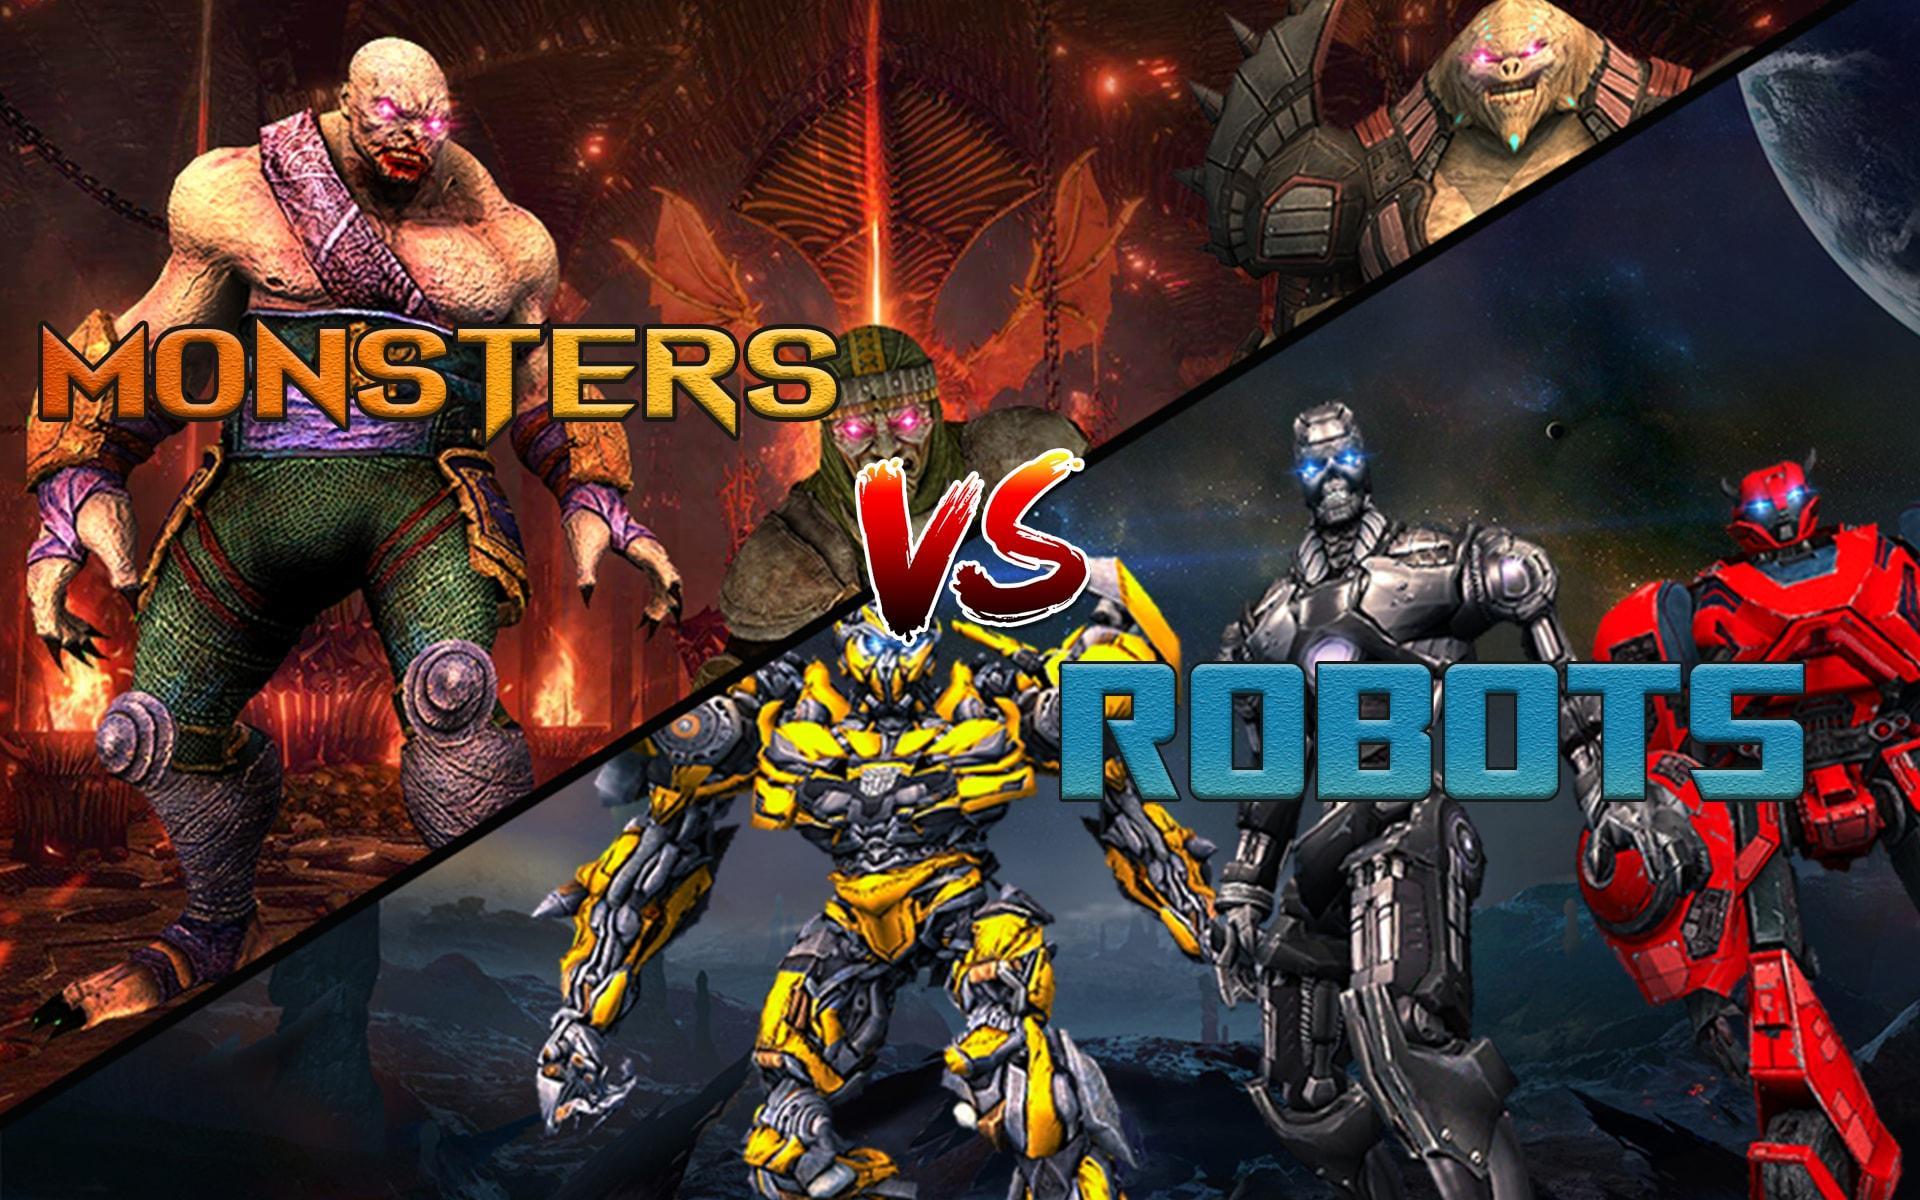 Monster vs Robot - Warriors Galaxy Battle 3D for Android - APK Download